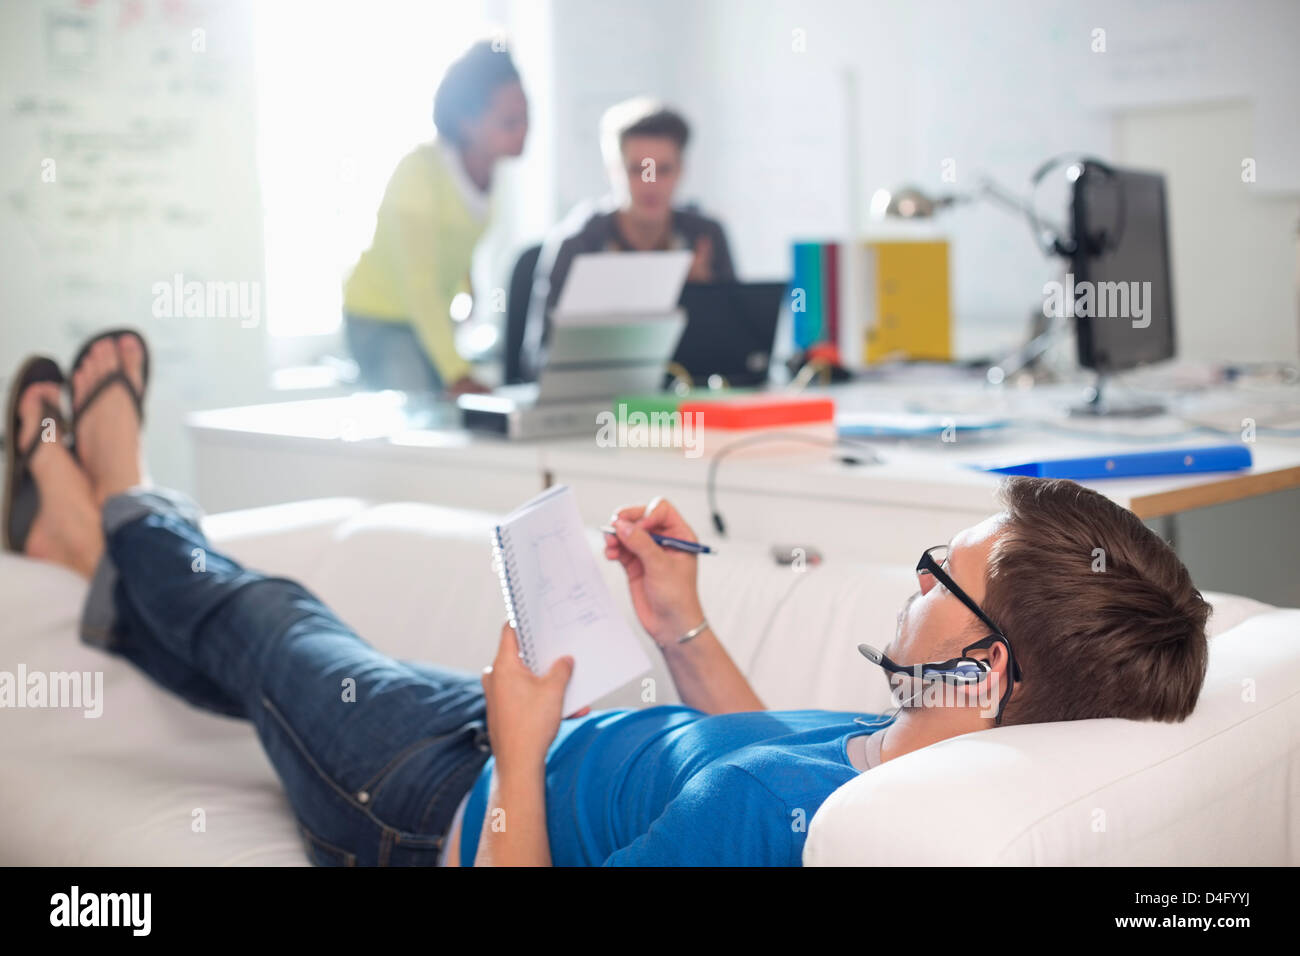 Businessman taking notes on sofa in office Banque D'Images